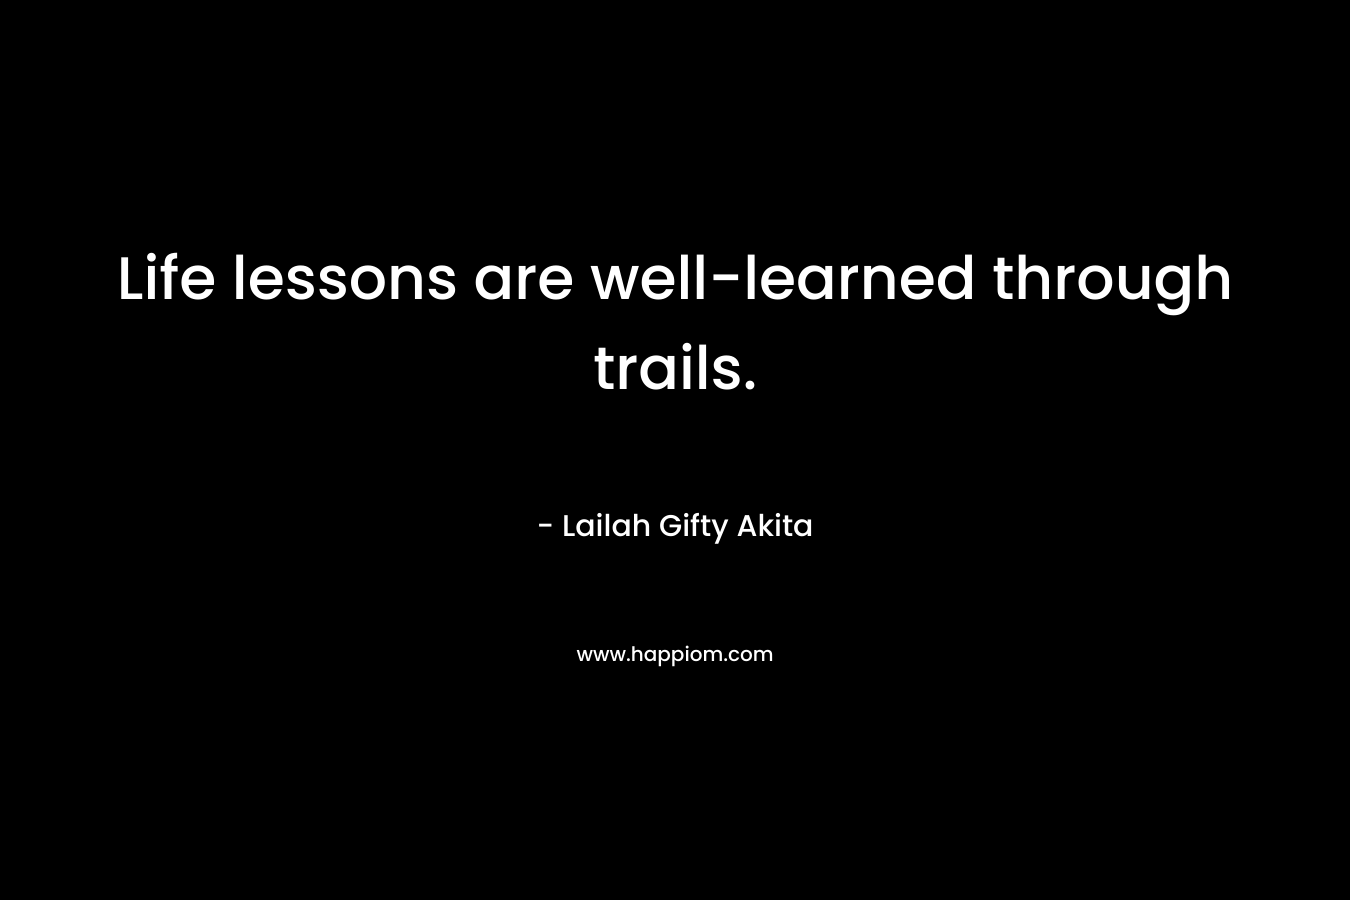 Life lessons are well-learned through trails. – Lailah Gifty Akita